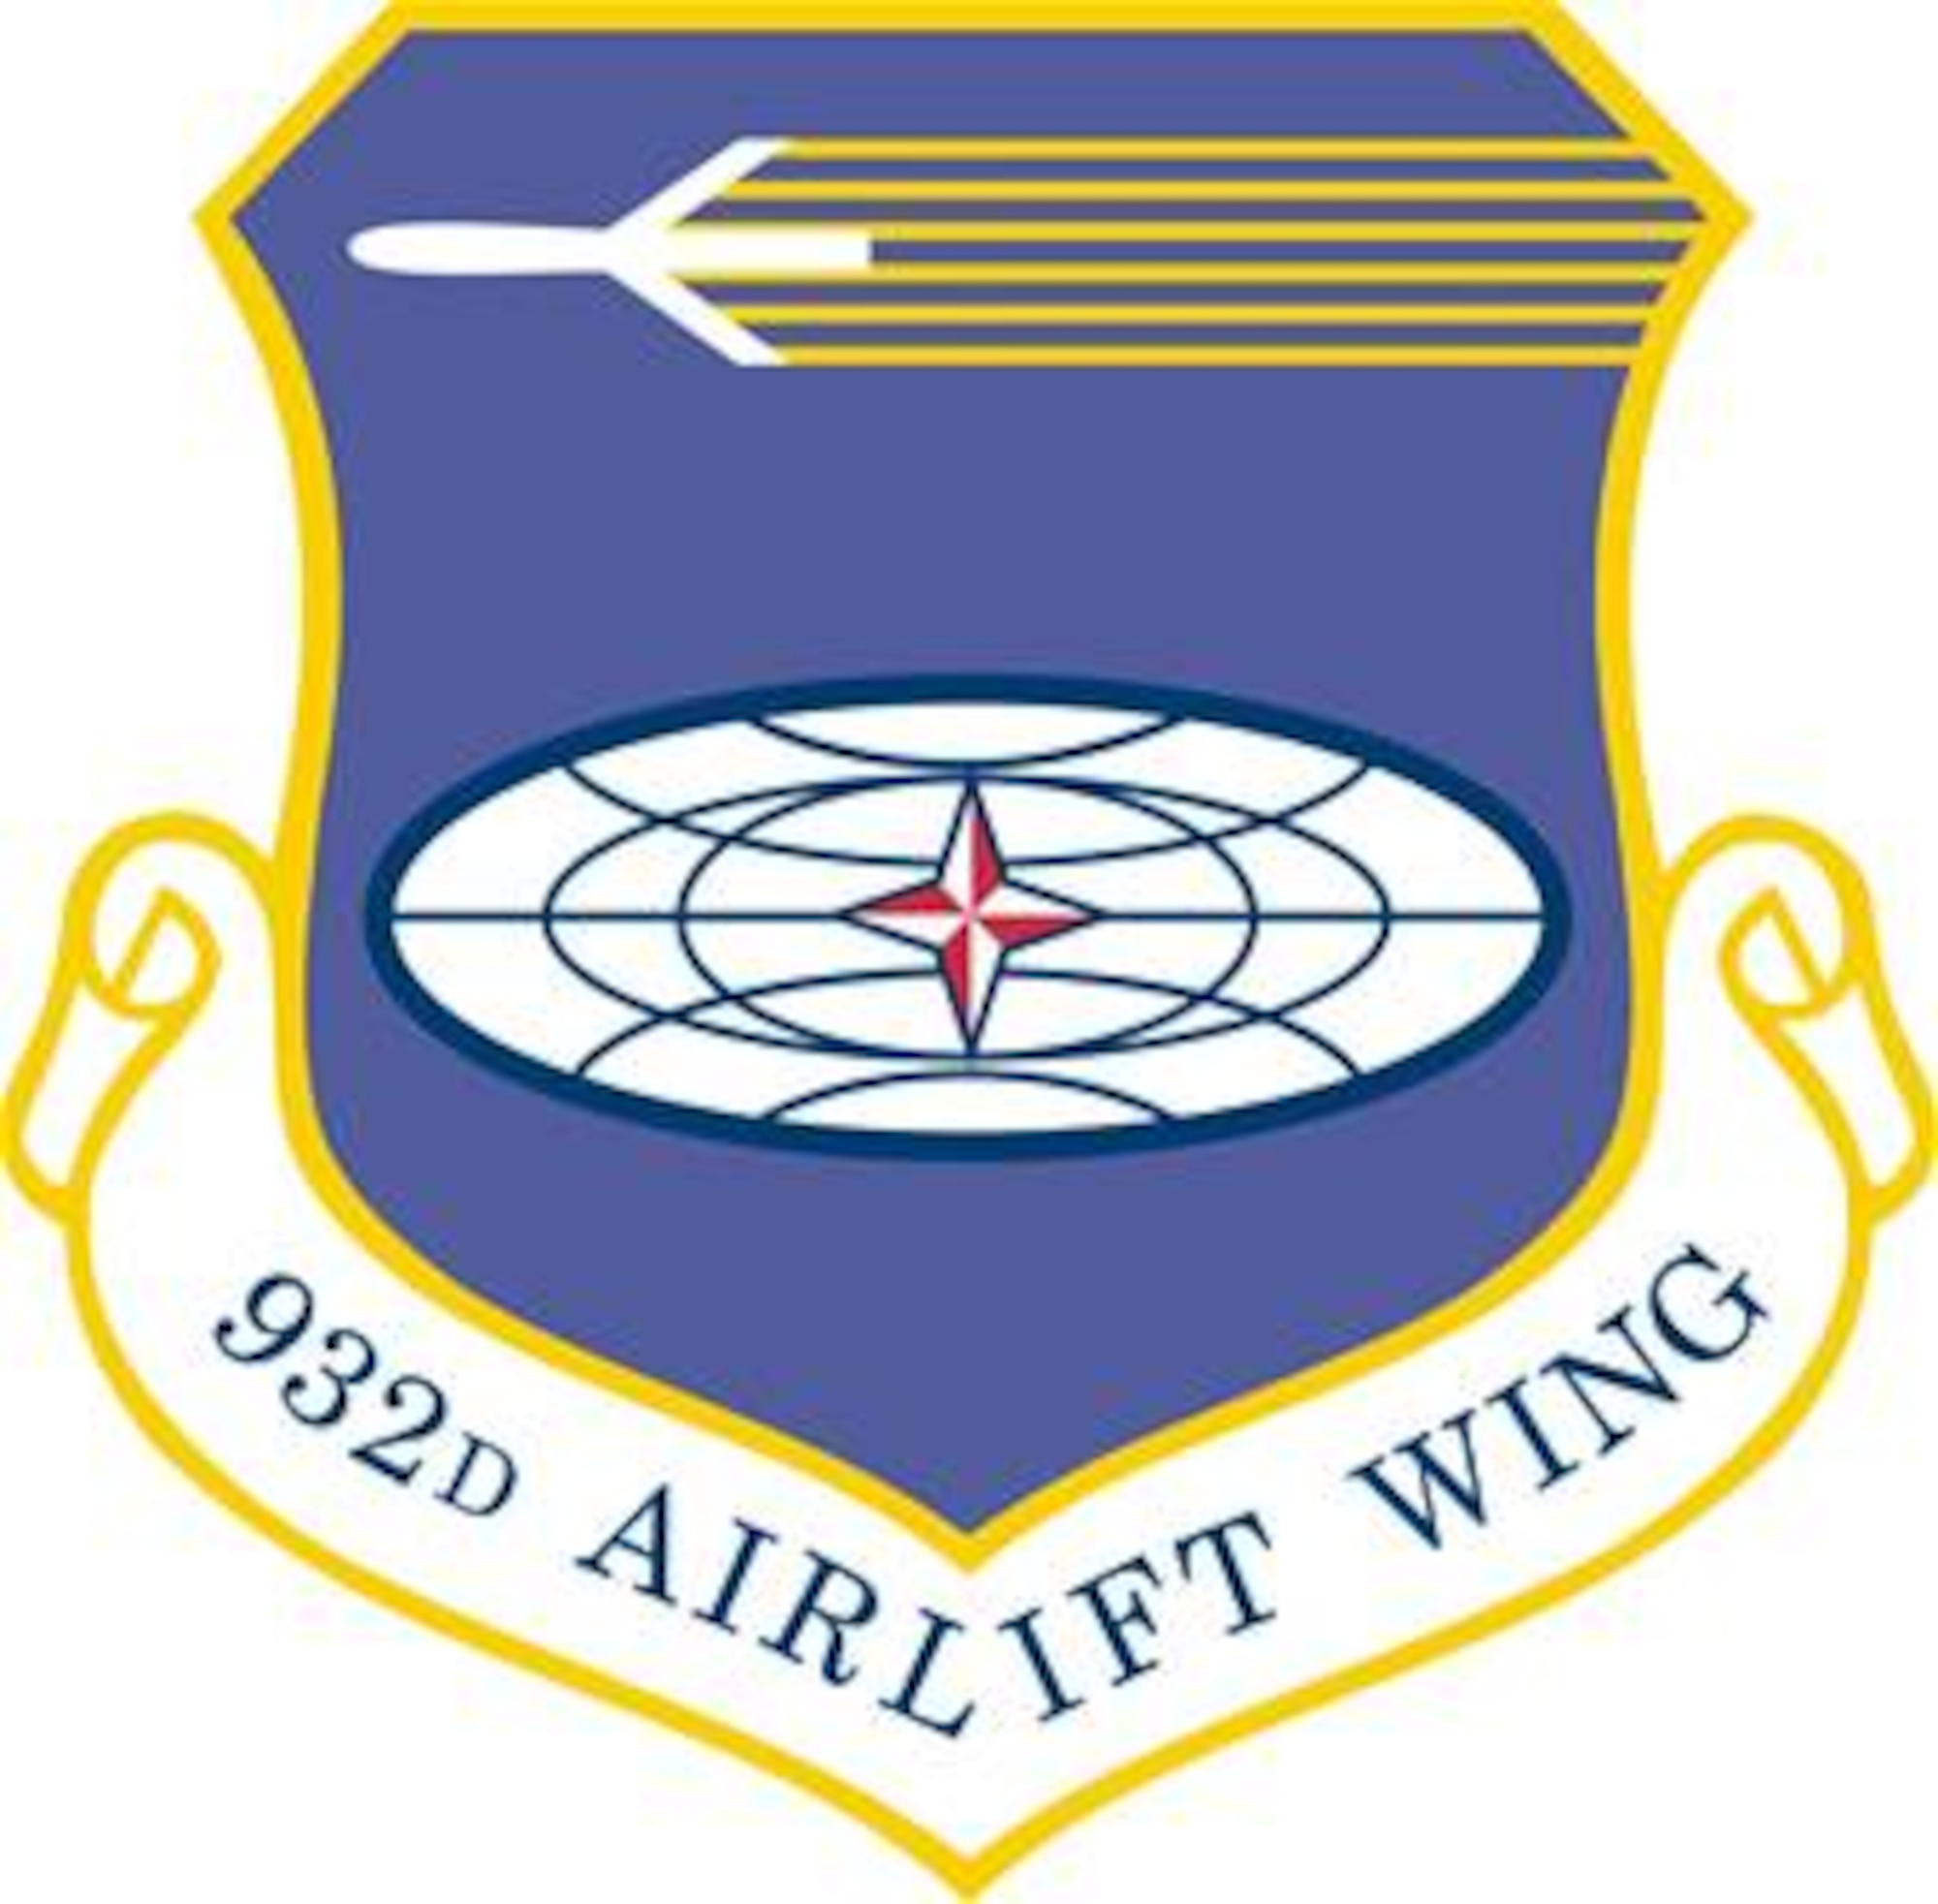 932nd Airlift Wing unit shield